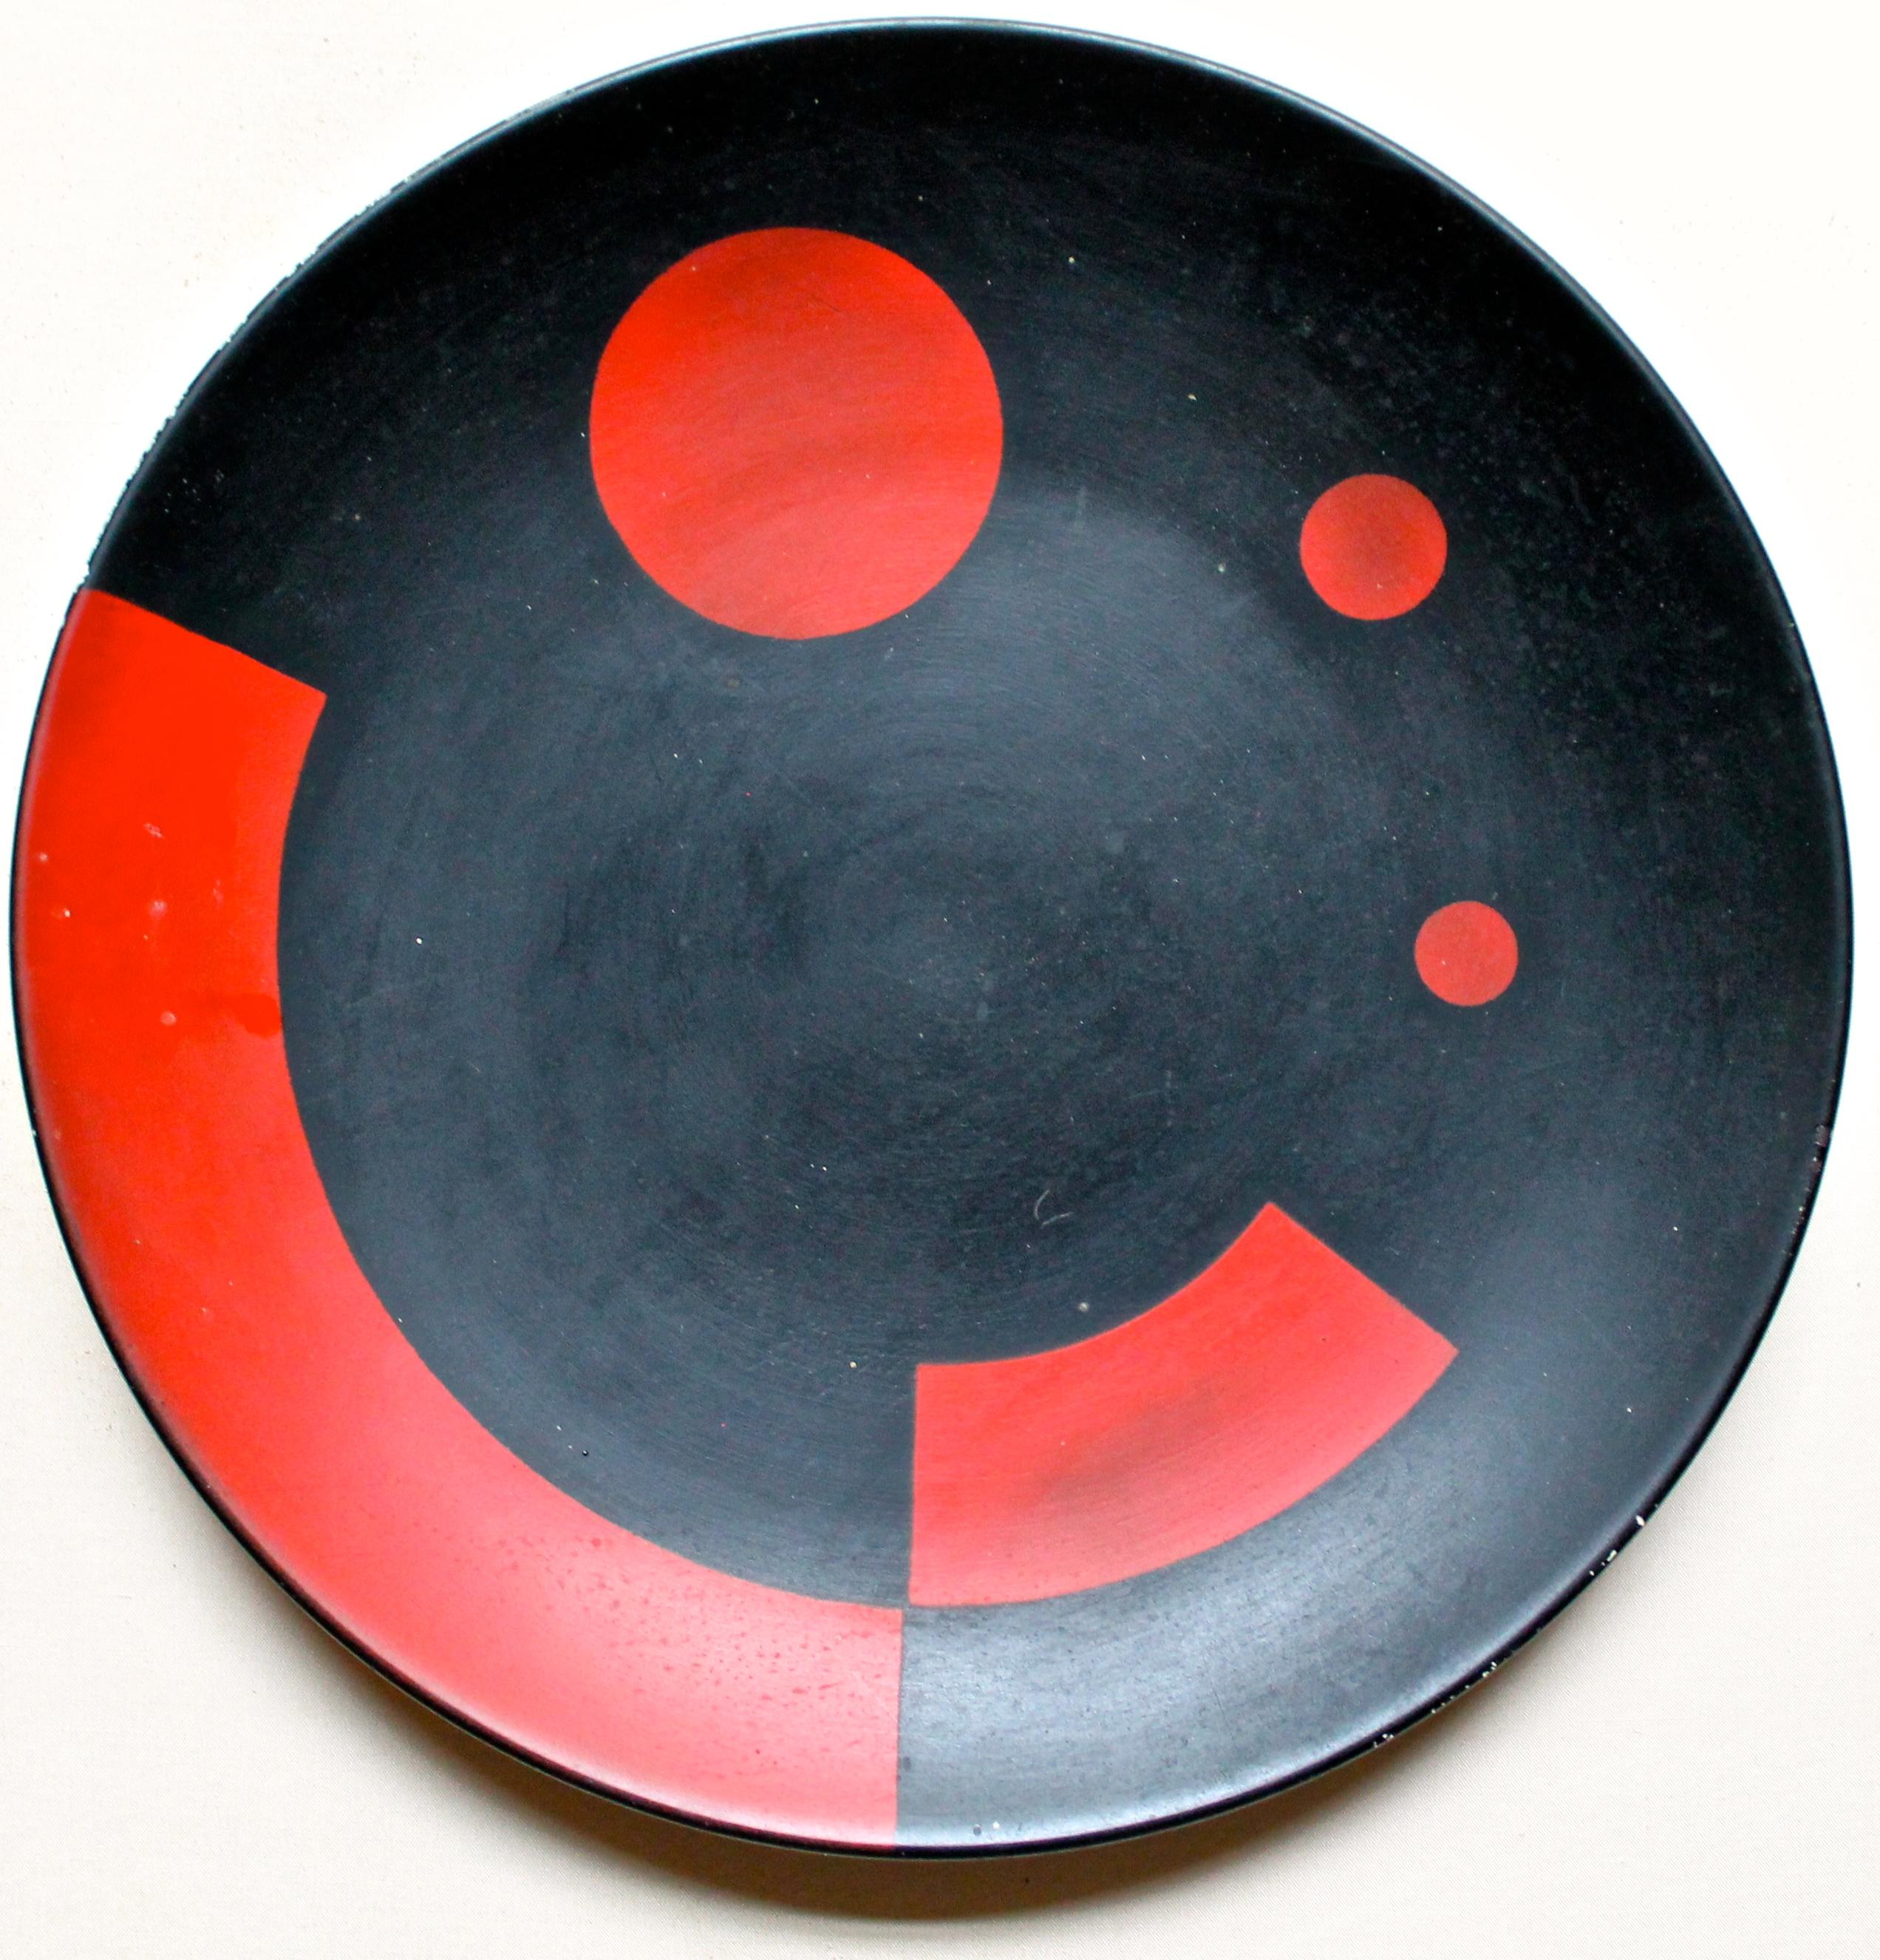 This famous and important modernist icon manufactured in 1925, after the 1923 design by El Lissitzky (Lazar Markovich Lissitzky 1890-1941). Red enamel stencil decoration over black slip.